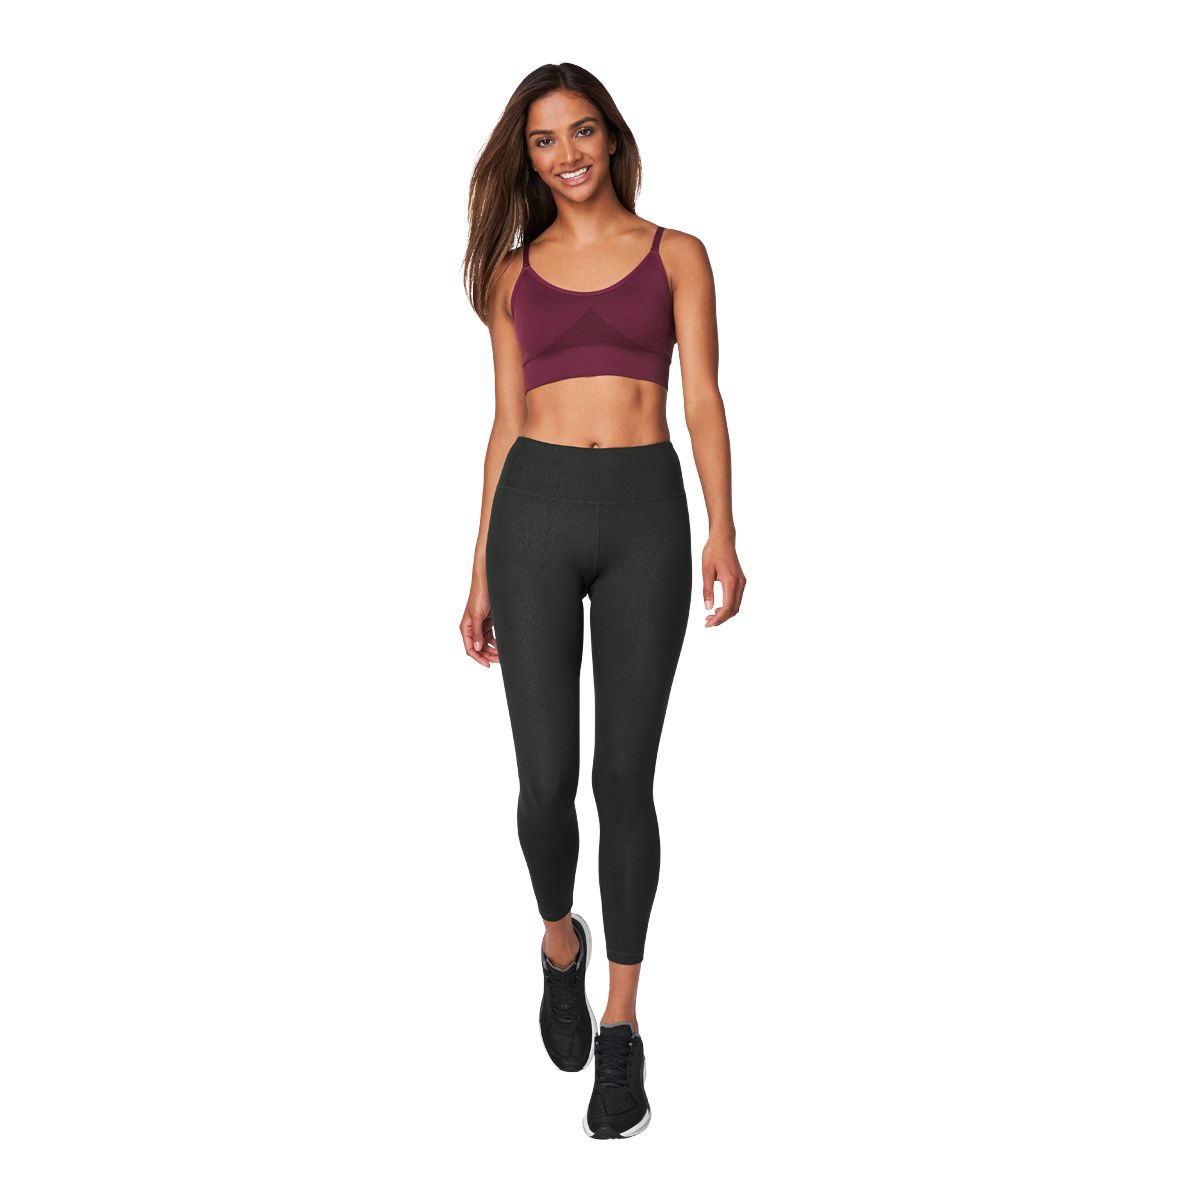 Womens Shock Proof Sports Sports Underwear Women With Thin Shoulder Straps,  Comfortable Back, And Yoga Vibes From Yqlchpchx888, $14.97